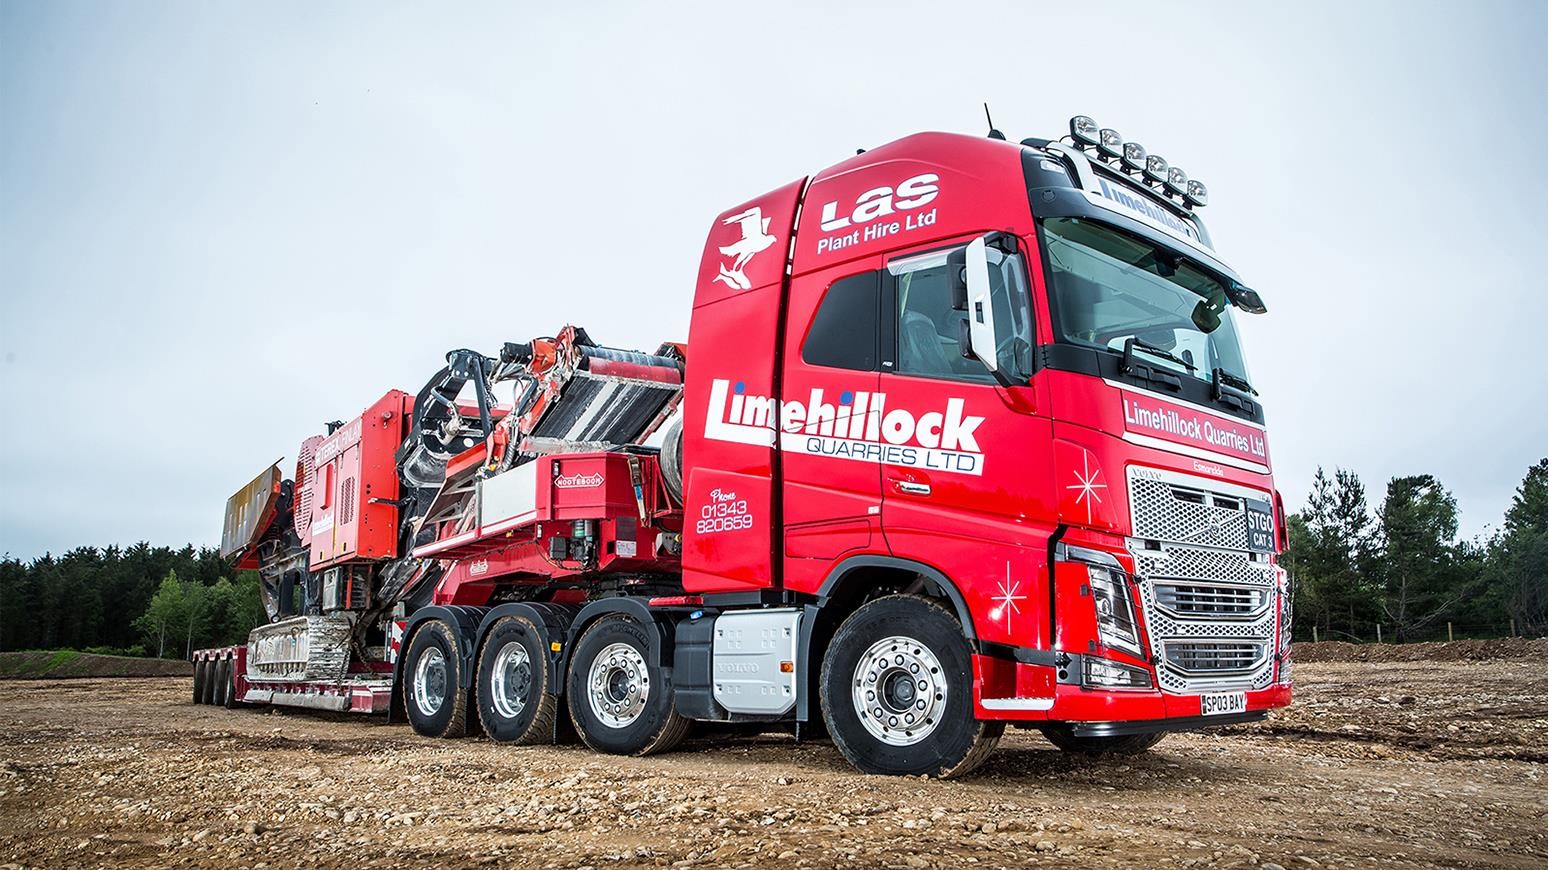 Scotland-Based Limehillock Quarries Purchases New Volvo FH16-750 & FH-500 Trucks To Haul Wide Range Of Trailers & Equipment